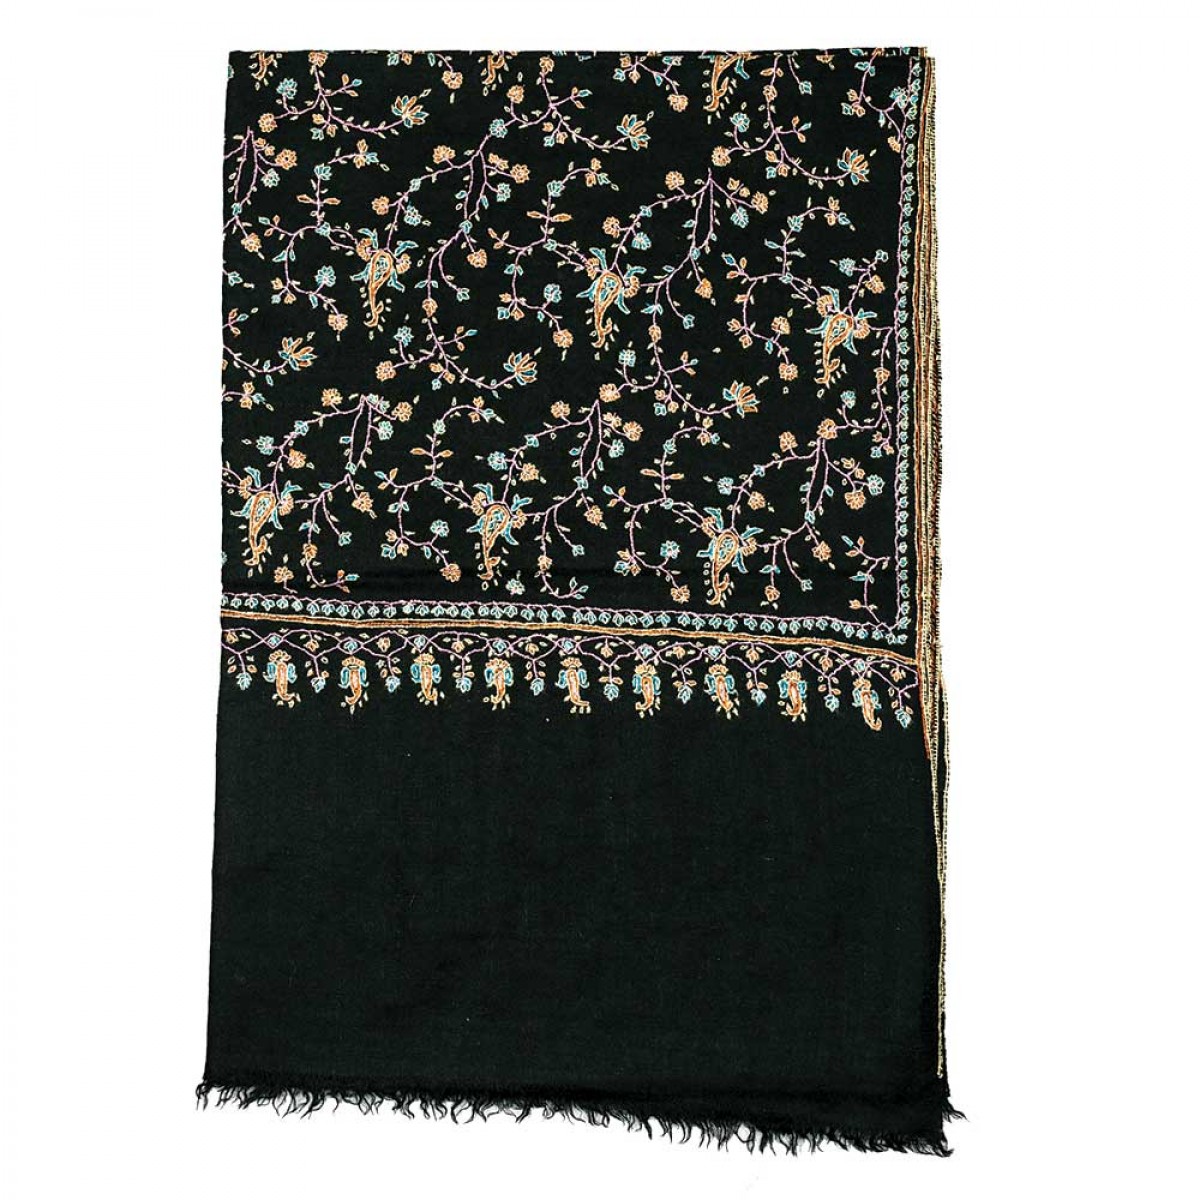 Embroidered Pashmina Stole - Black All Over